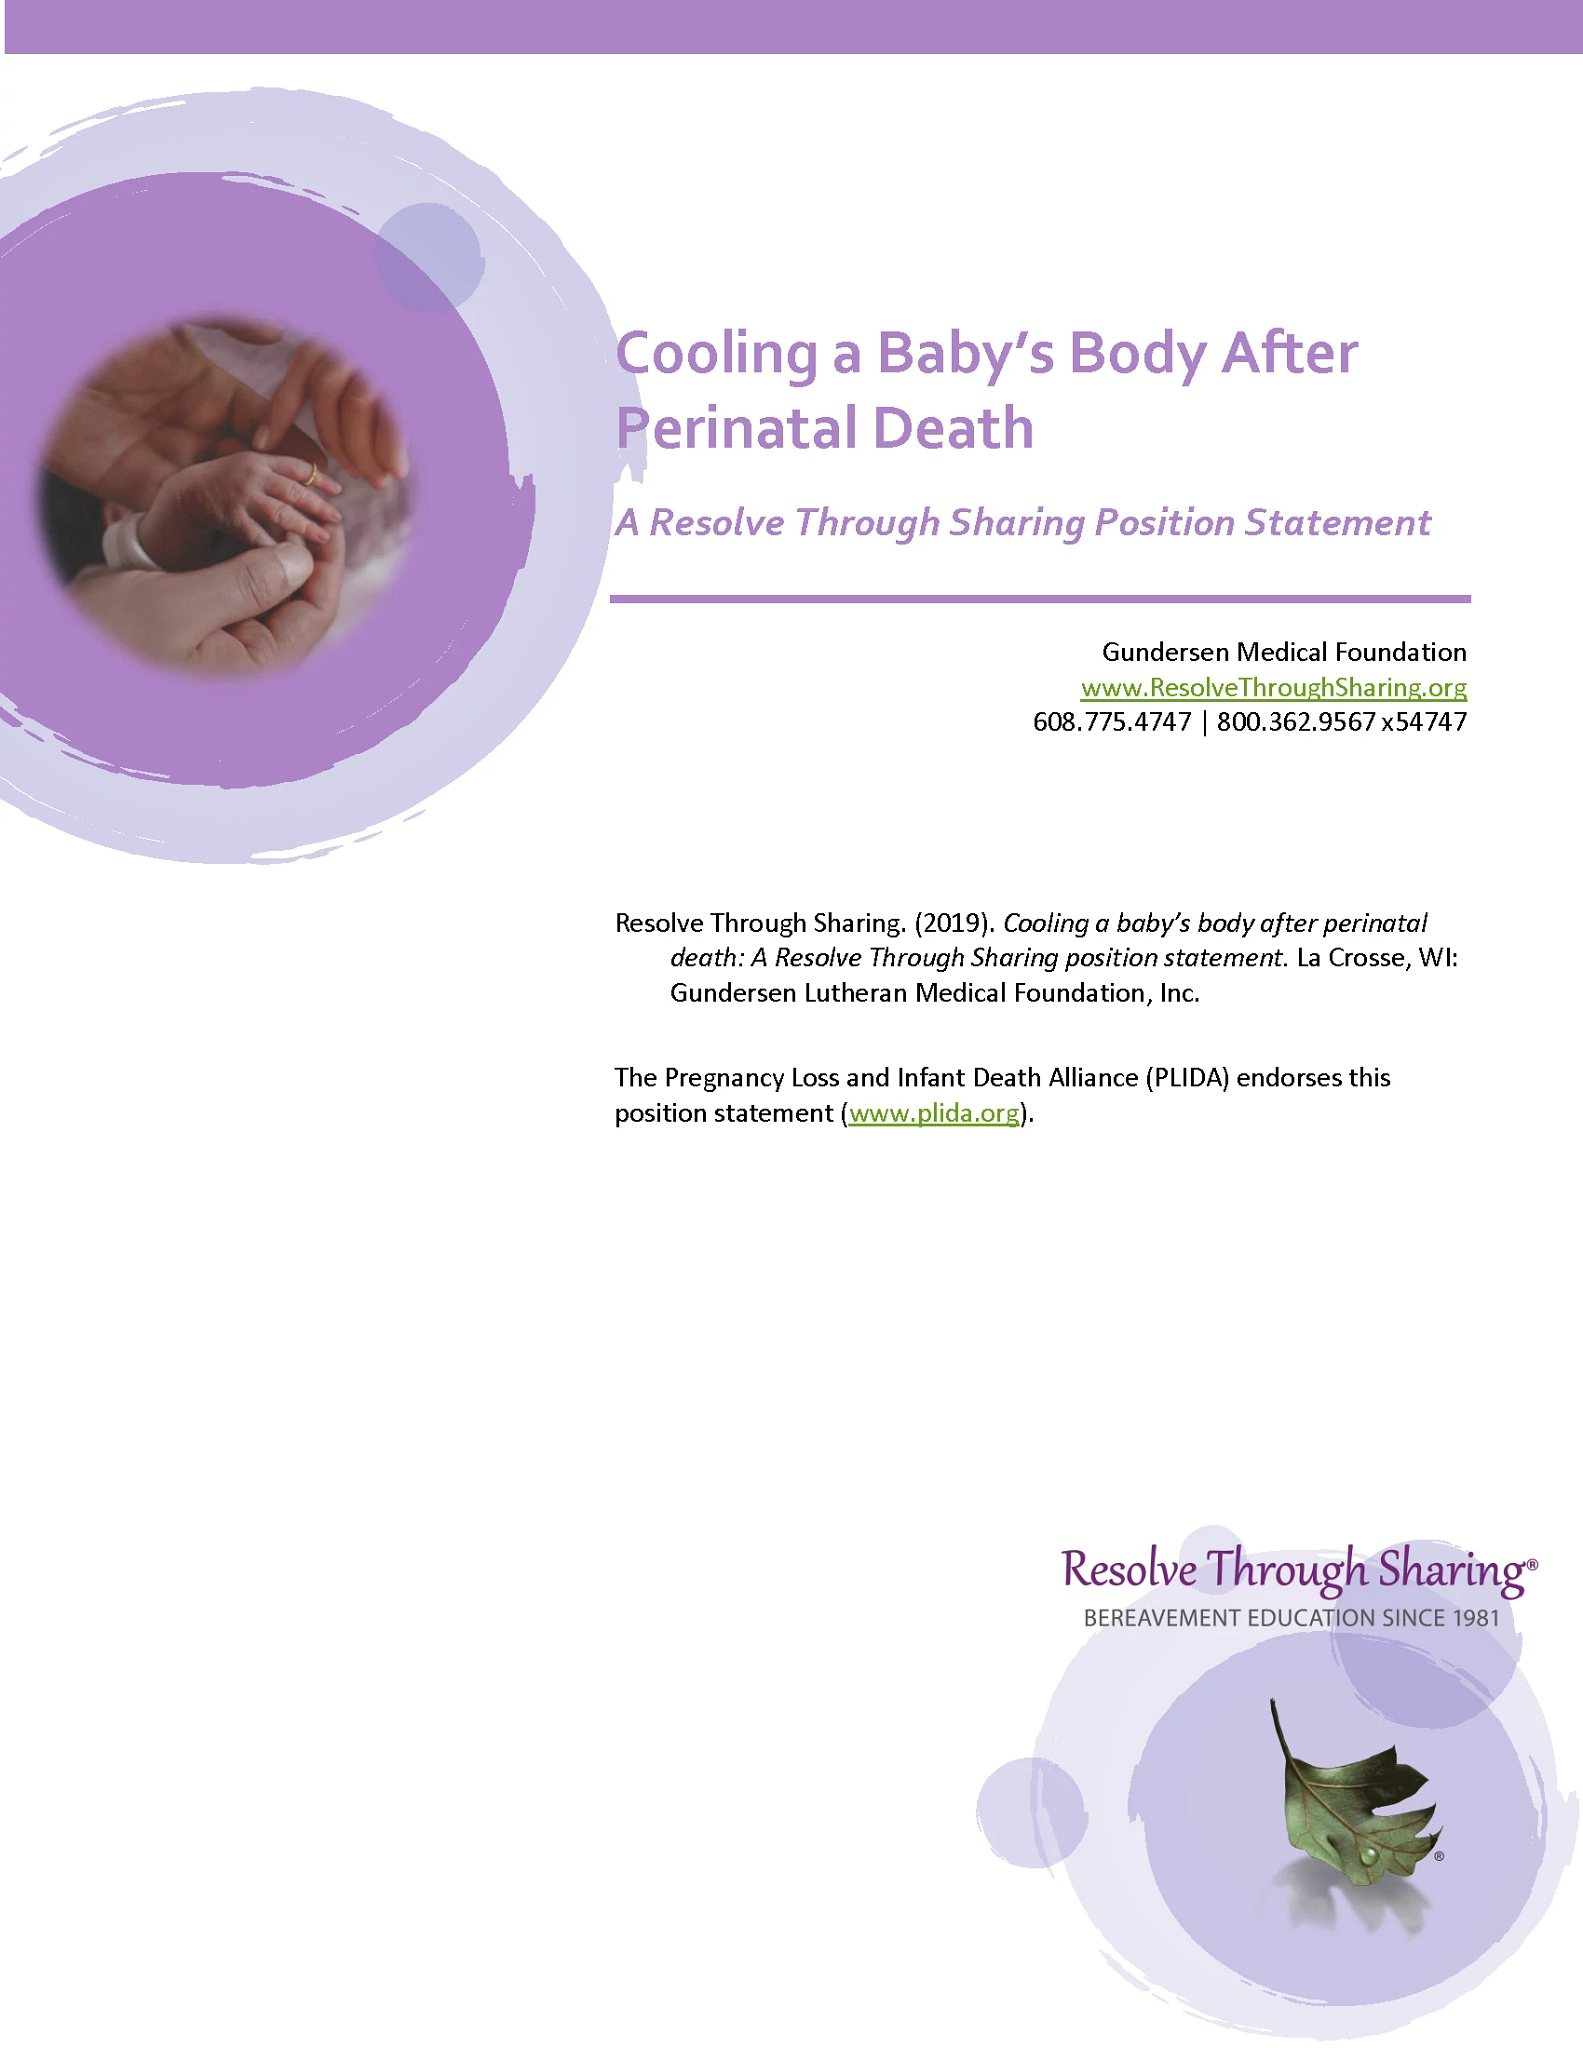 Cooling a baby's body after perinatal death position statement cover.